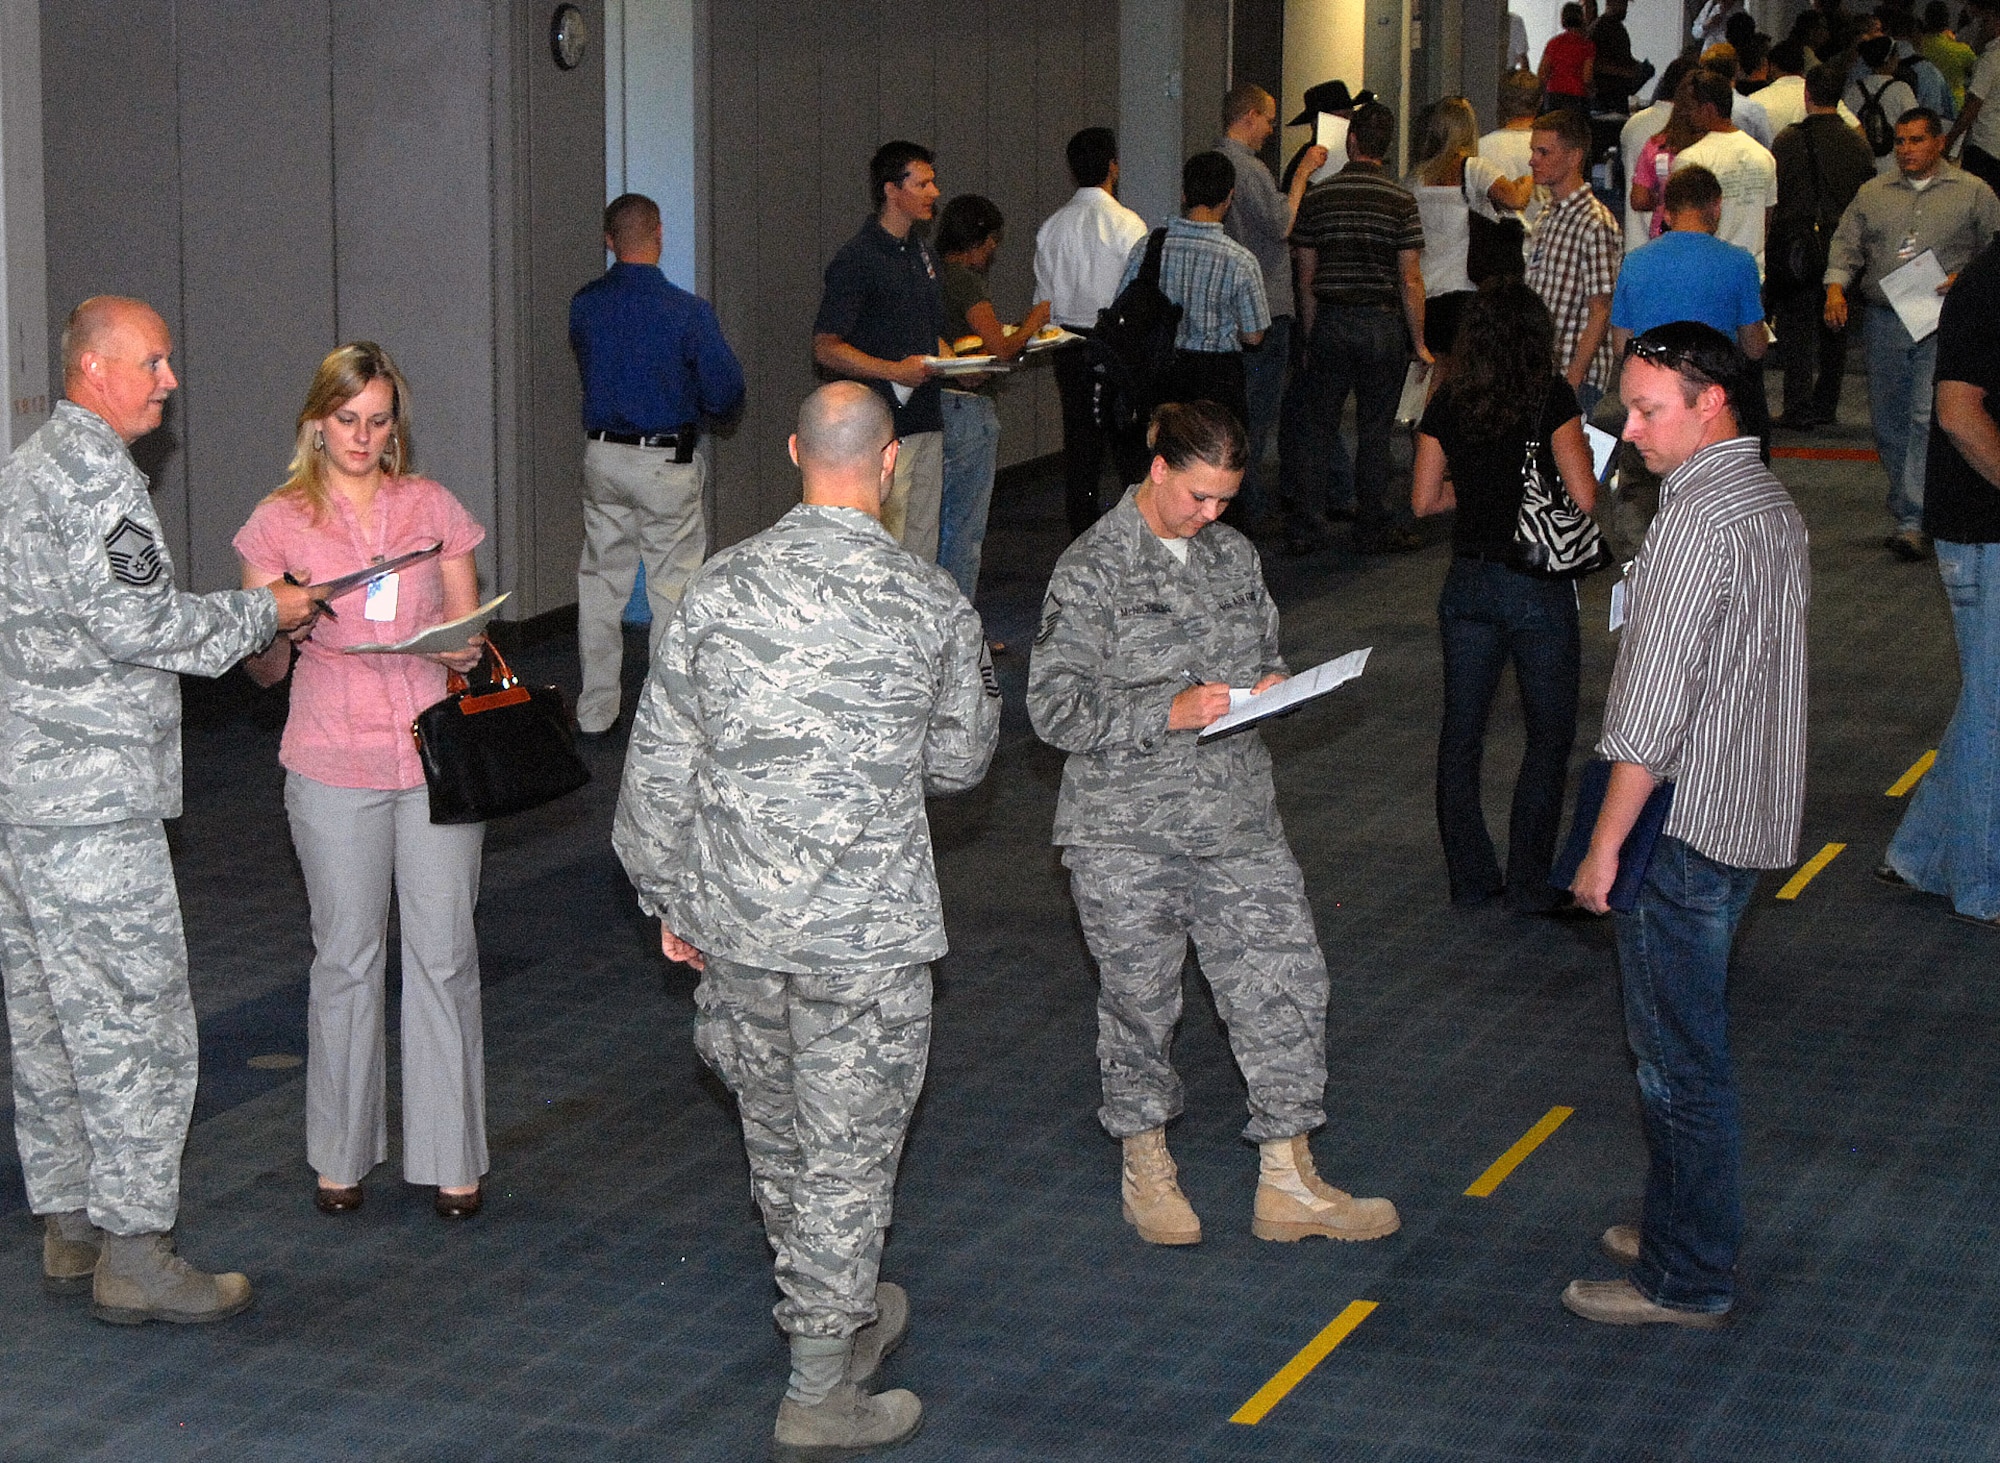 More than 170 men and women participated in the Individual Ready Reserve muster at the Air Reserve Personnel Center on June 18. ARPC holds one muster annually and will manage 20 musters at Air Force bases nationwide in 2010. (U.S. Air Force photo/Dwayne Beuthel)